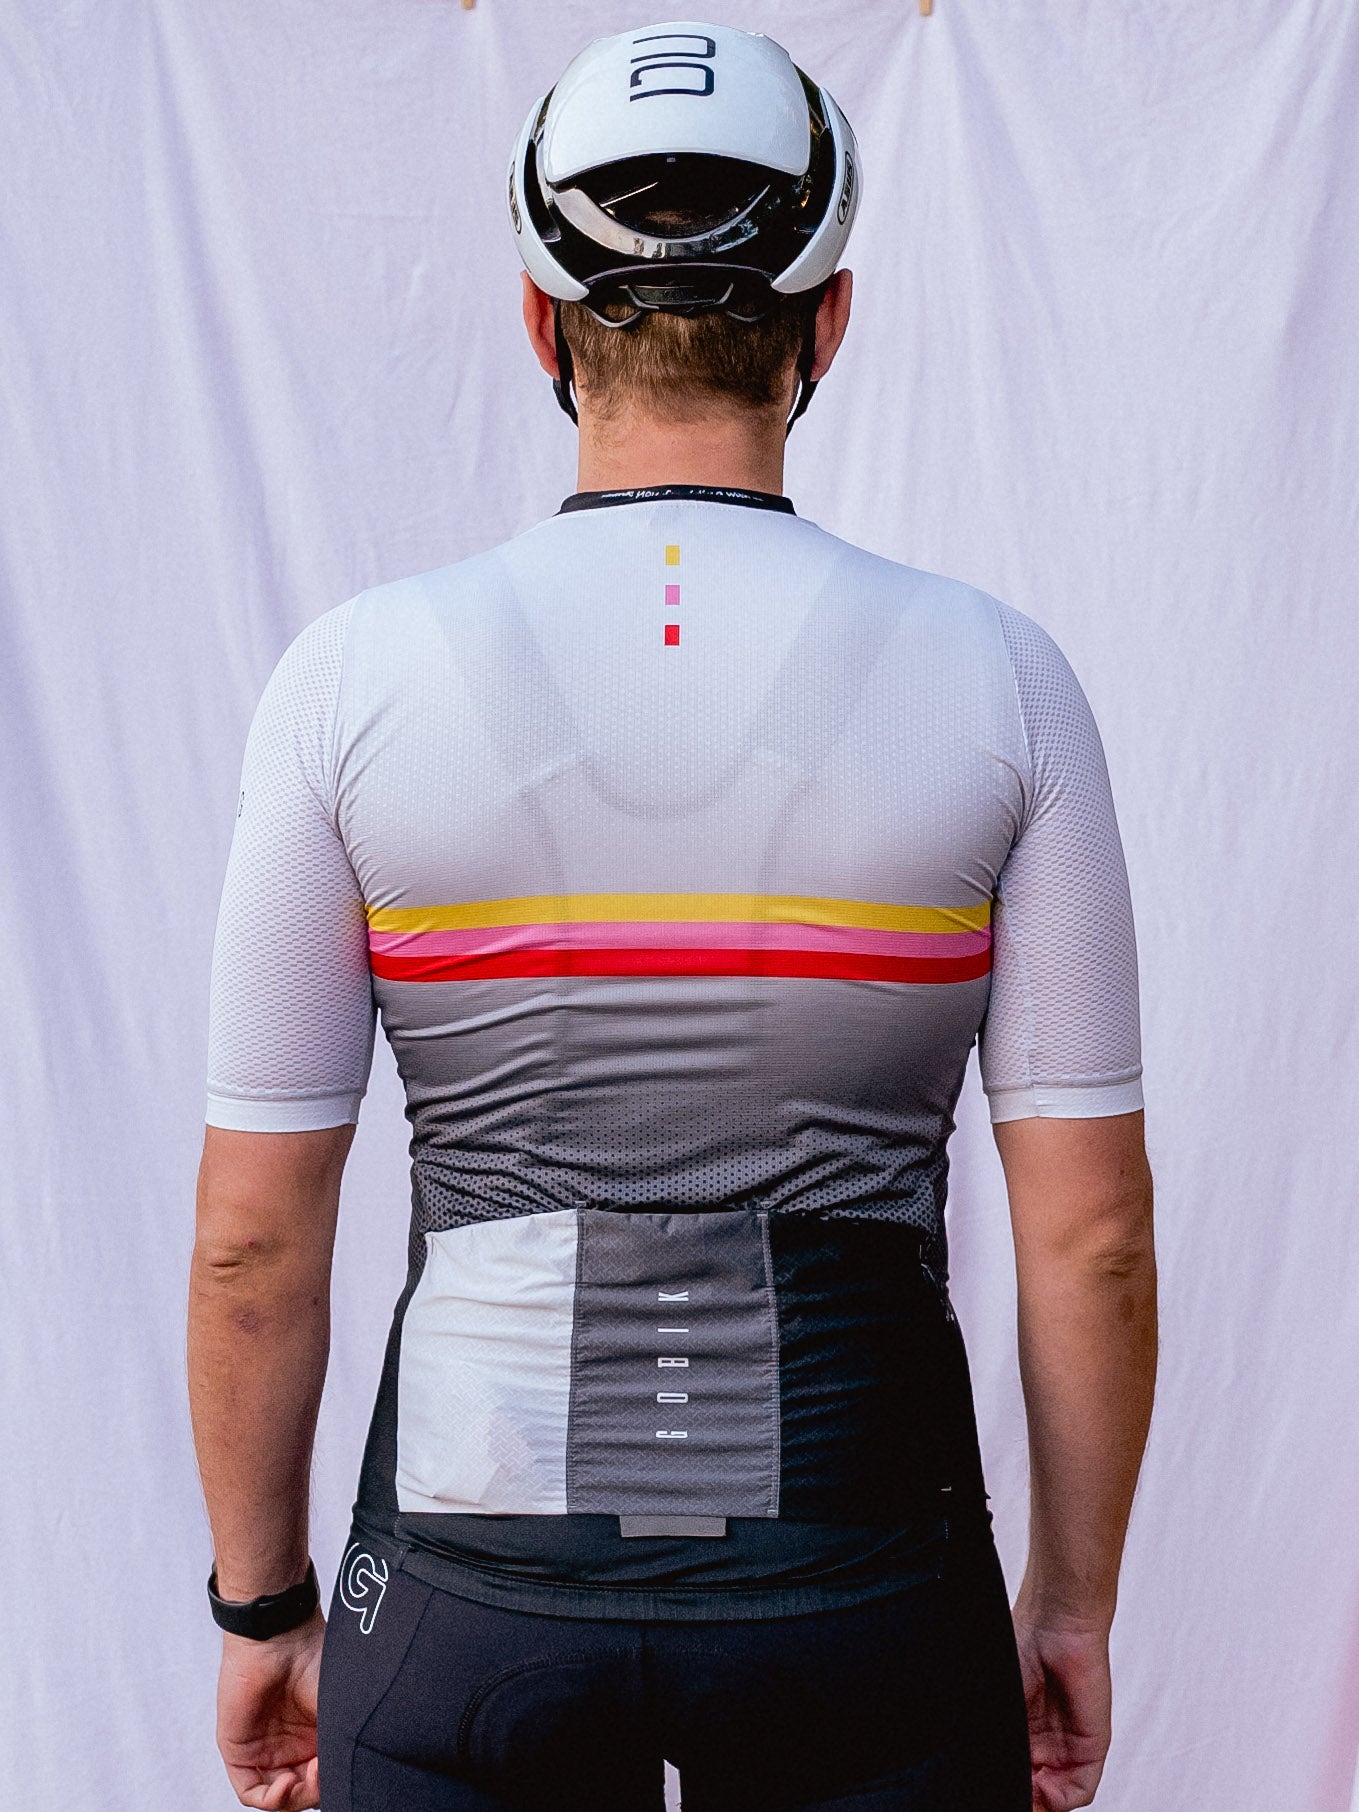 GRUPPETTO GRAND TOUR TRIBUTE JERSEY - for long rides in the summer